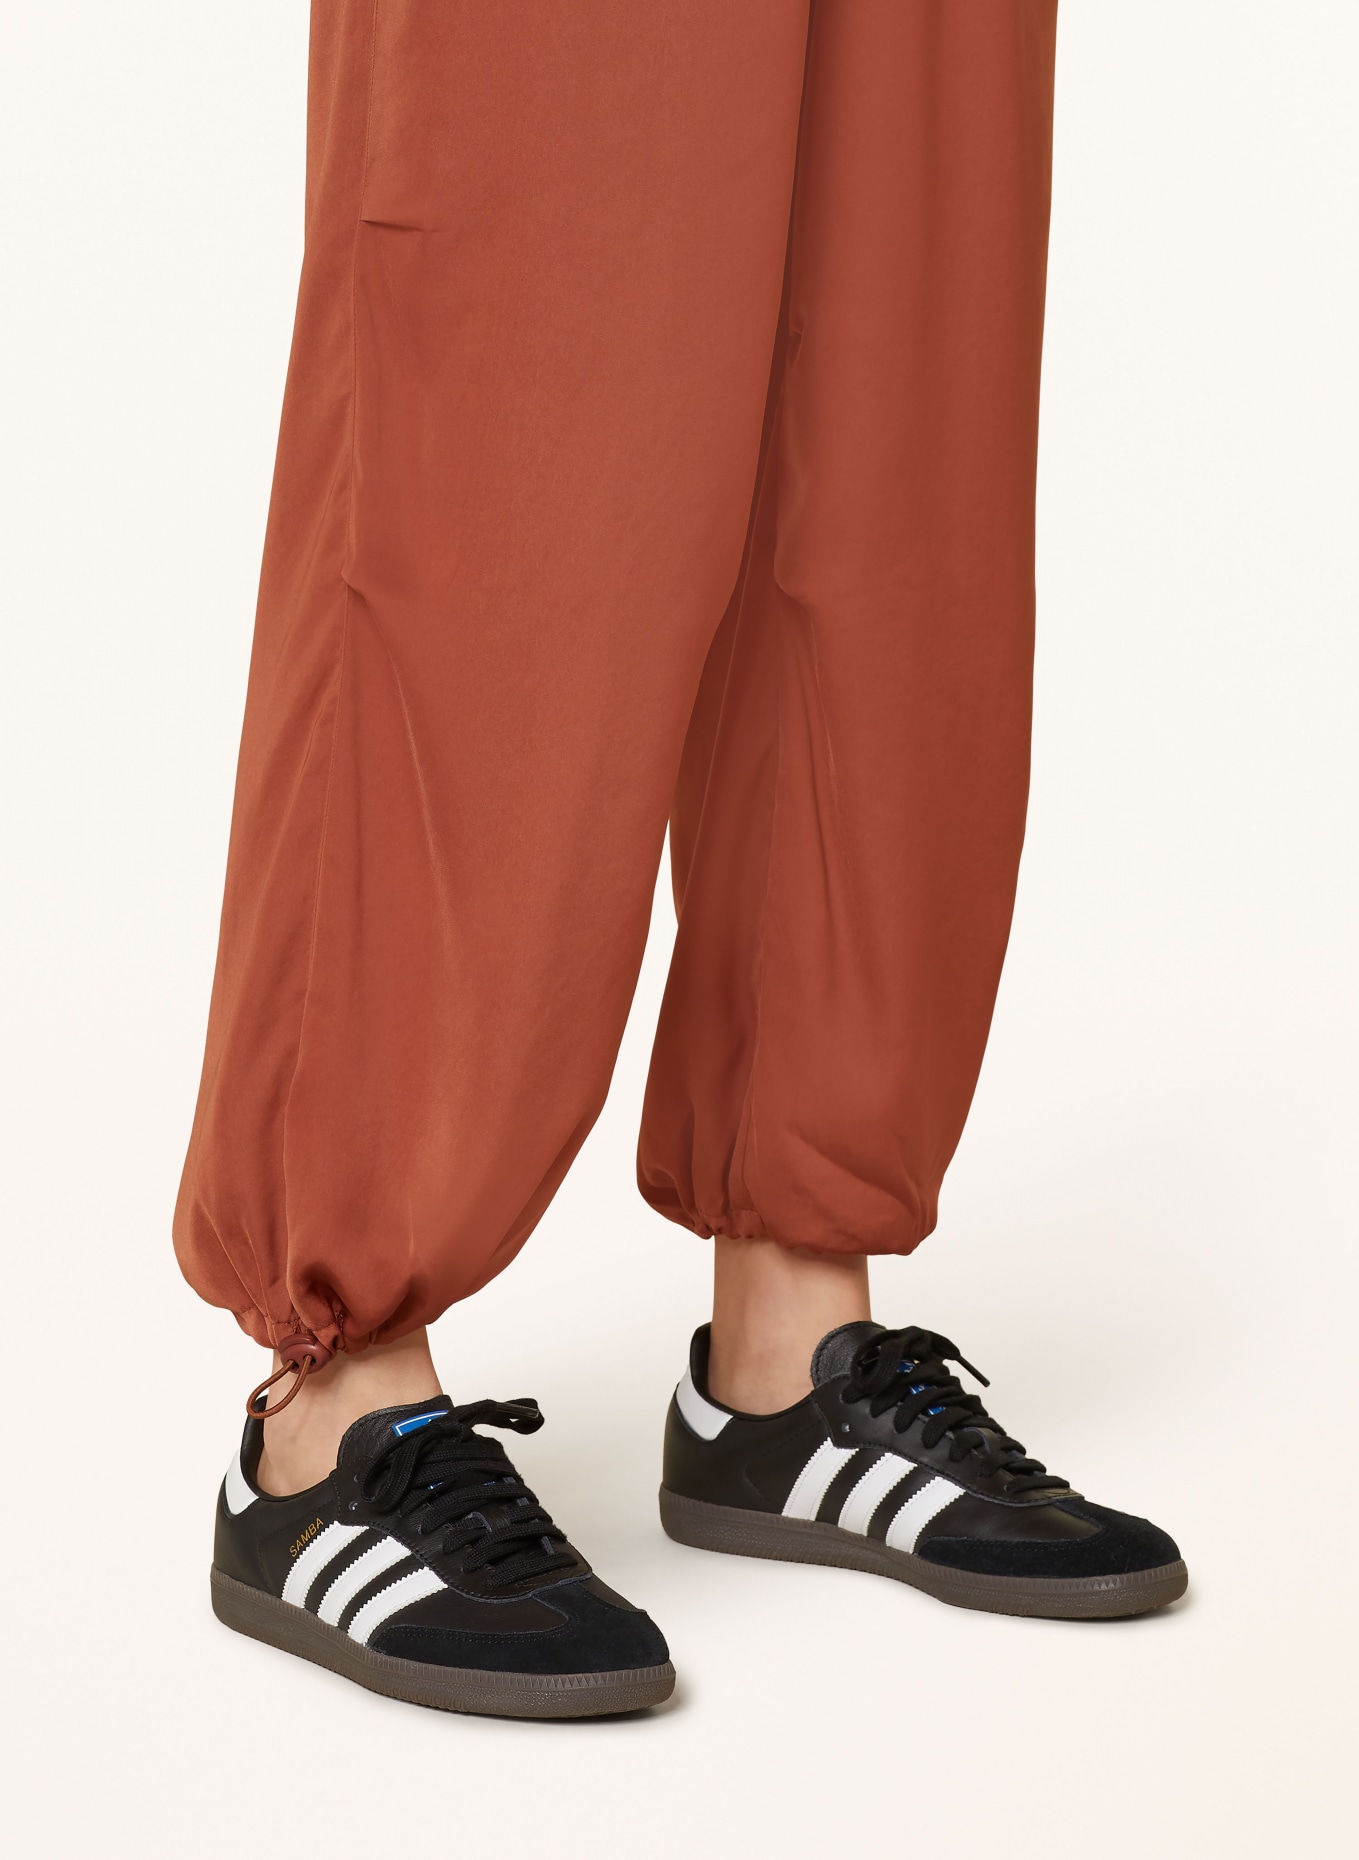 10DAYS Satin pants in jogger style, Color: BROWN (Image 5)